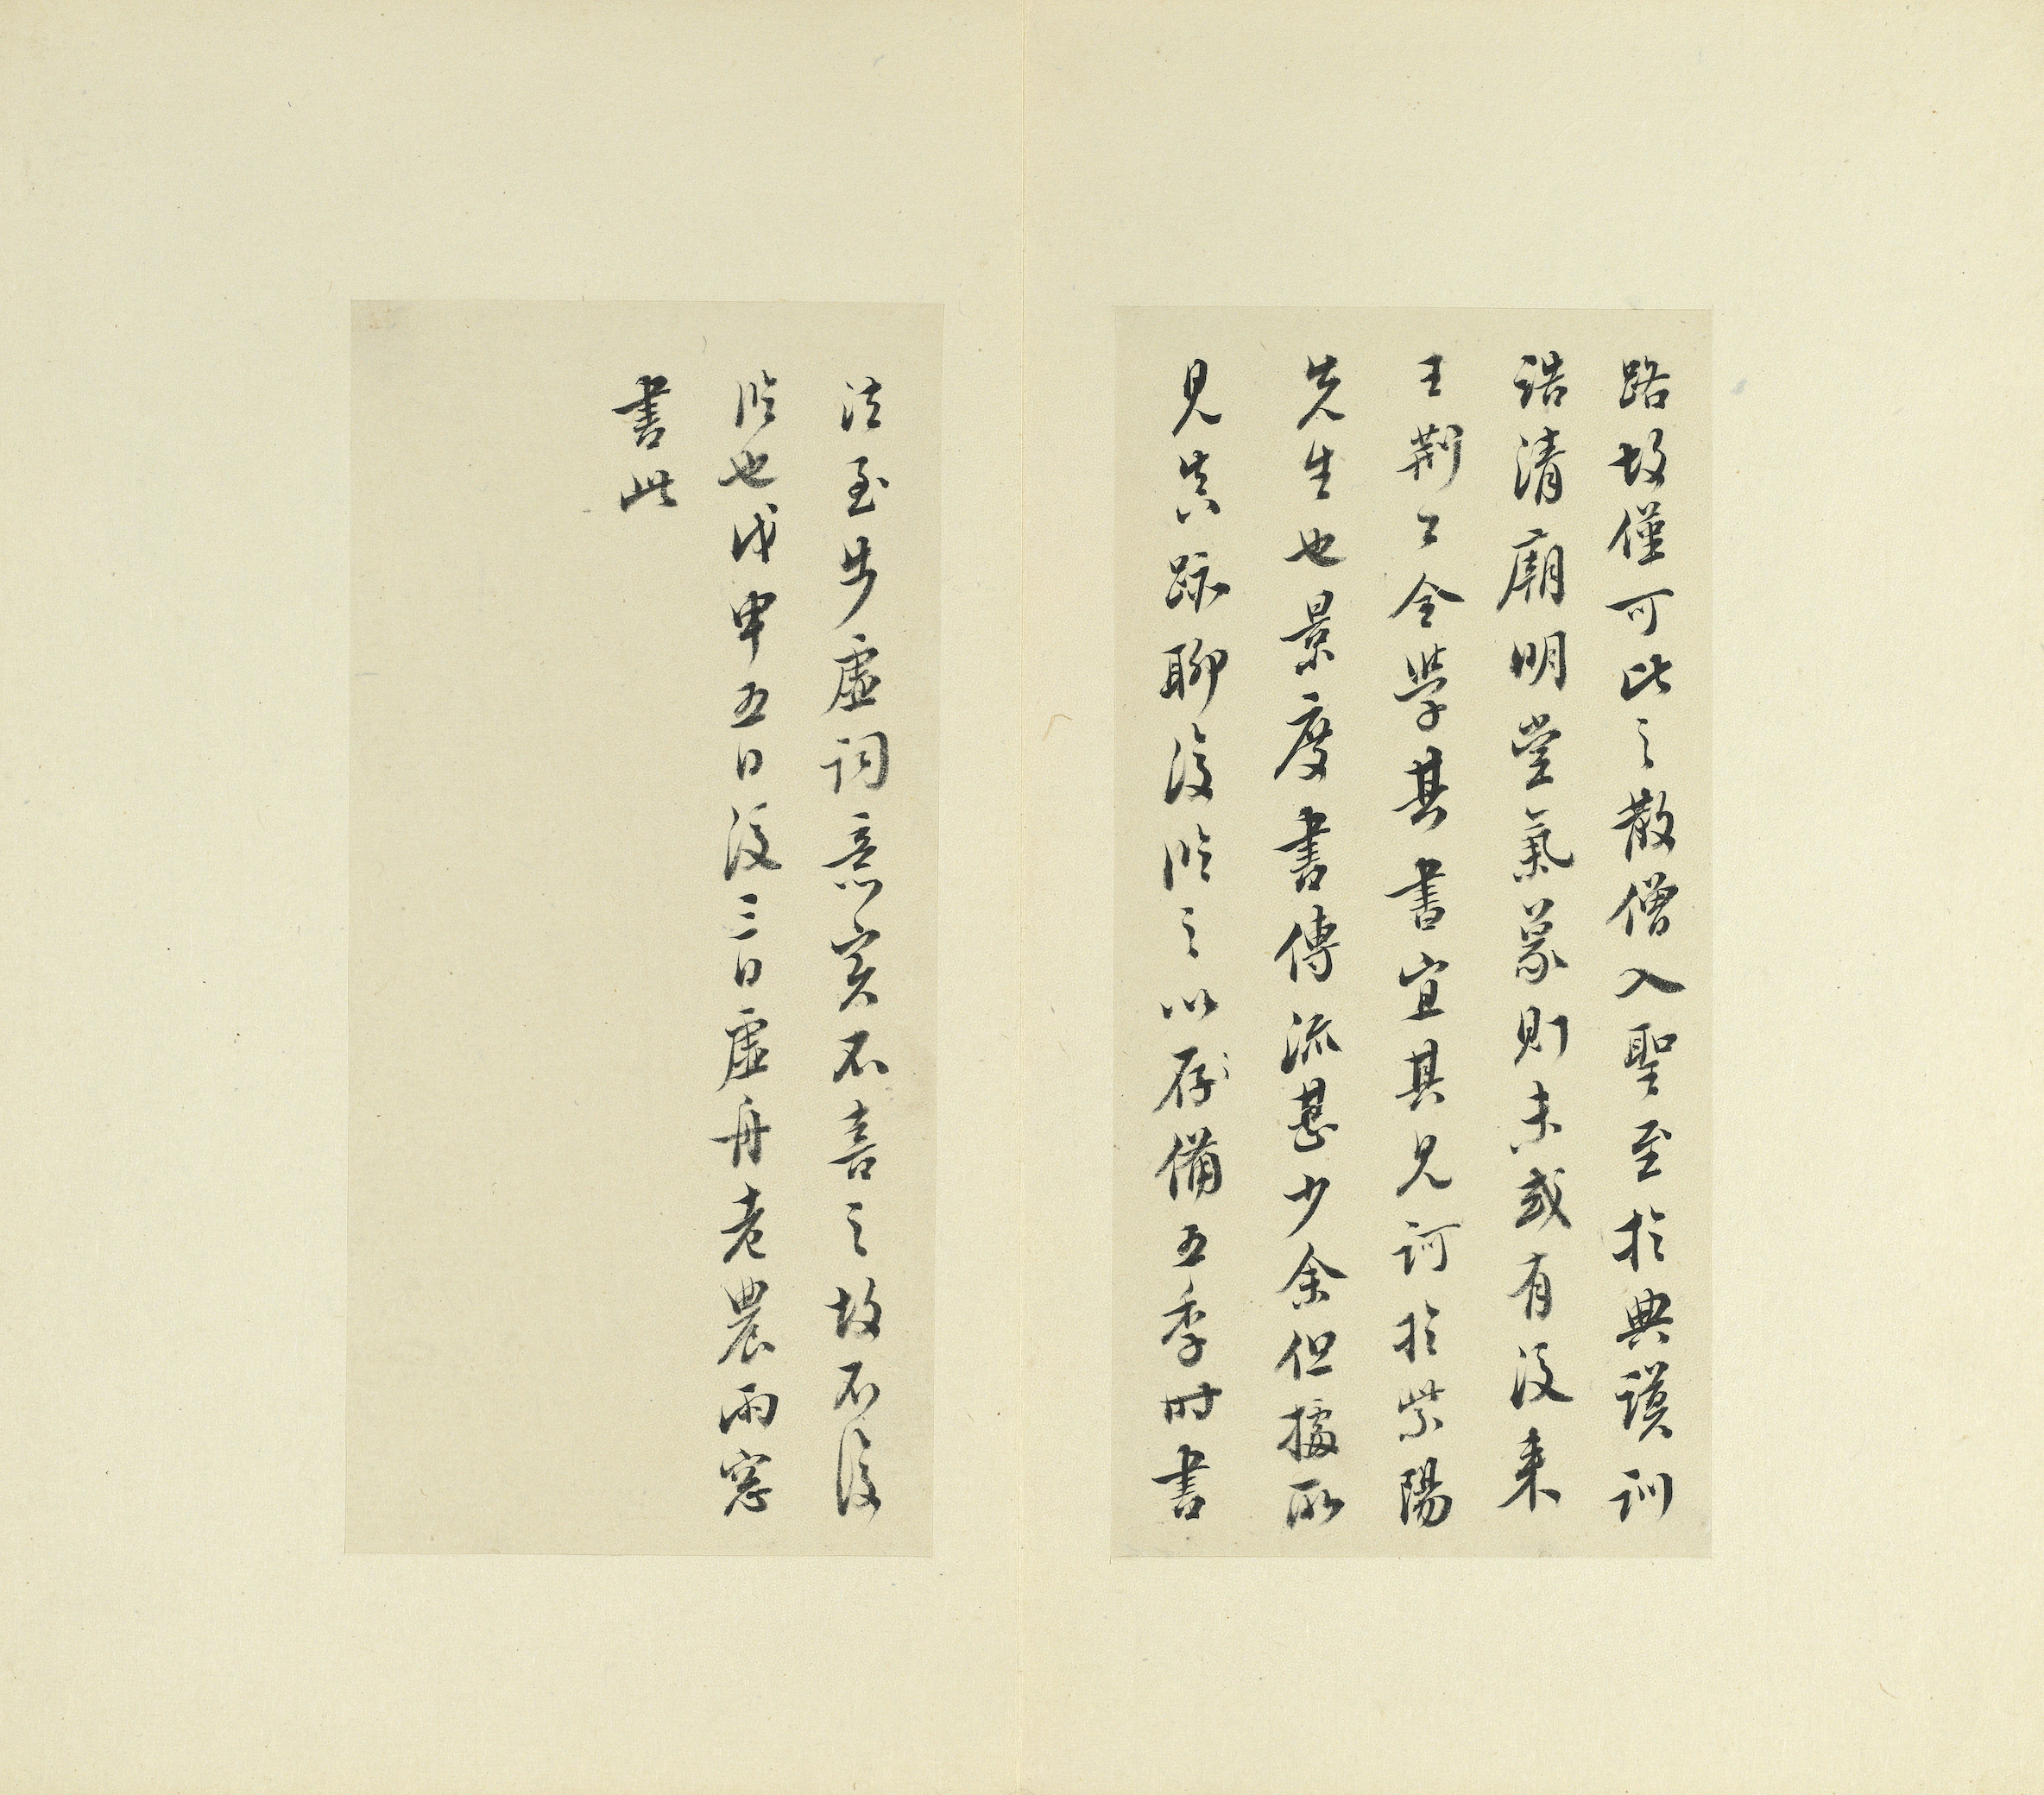 Copy of Yang Ningshi's "Methods of the Immortals for Daily Life"